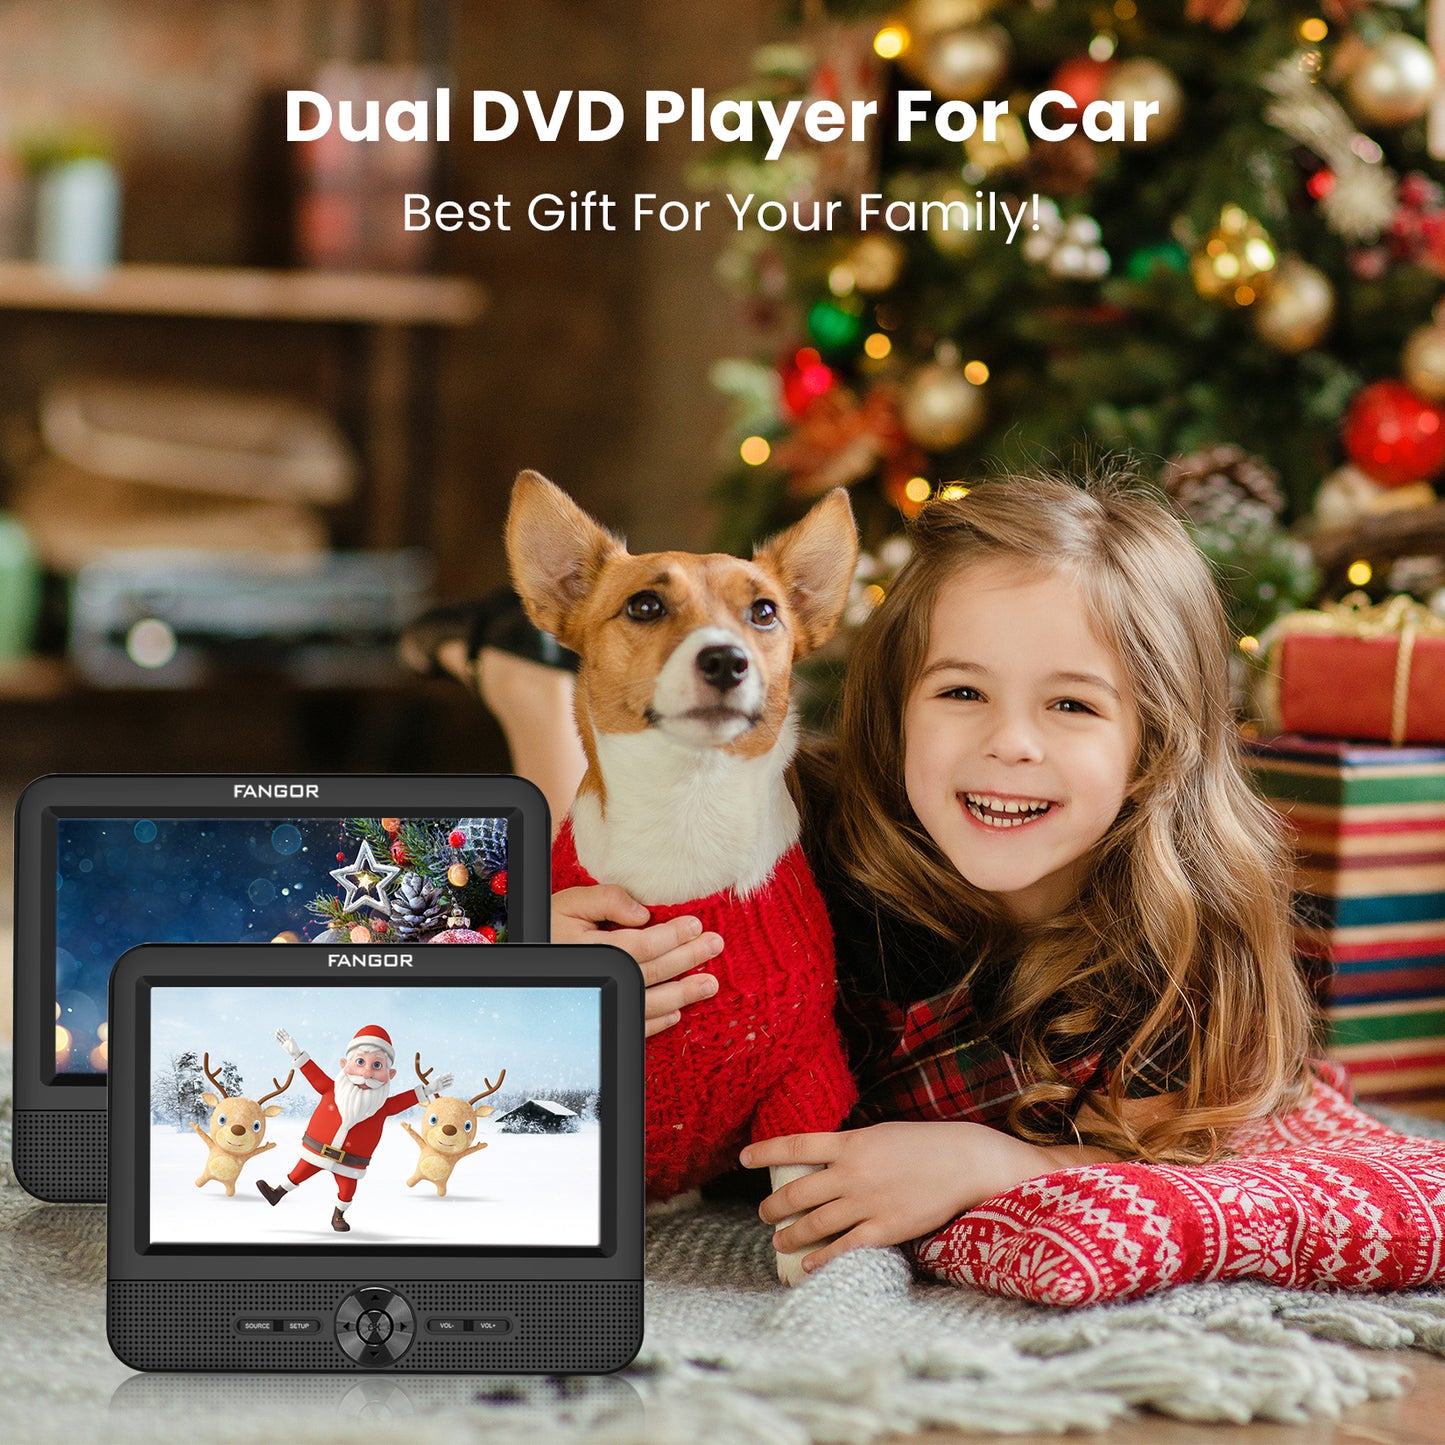 FANGOR Dual Screen DVD Player, 7.5" Portable Headrest Car DVD Player with Monitor, 5 Hours Rechargeable Battery, Last Memory, AV Out& In, Support USB/SD/Sync TV, Best Gift choice !